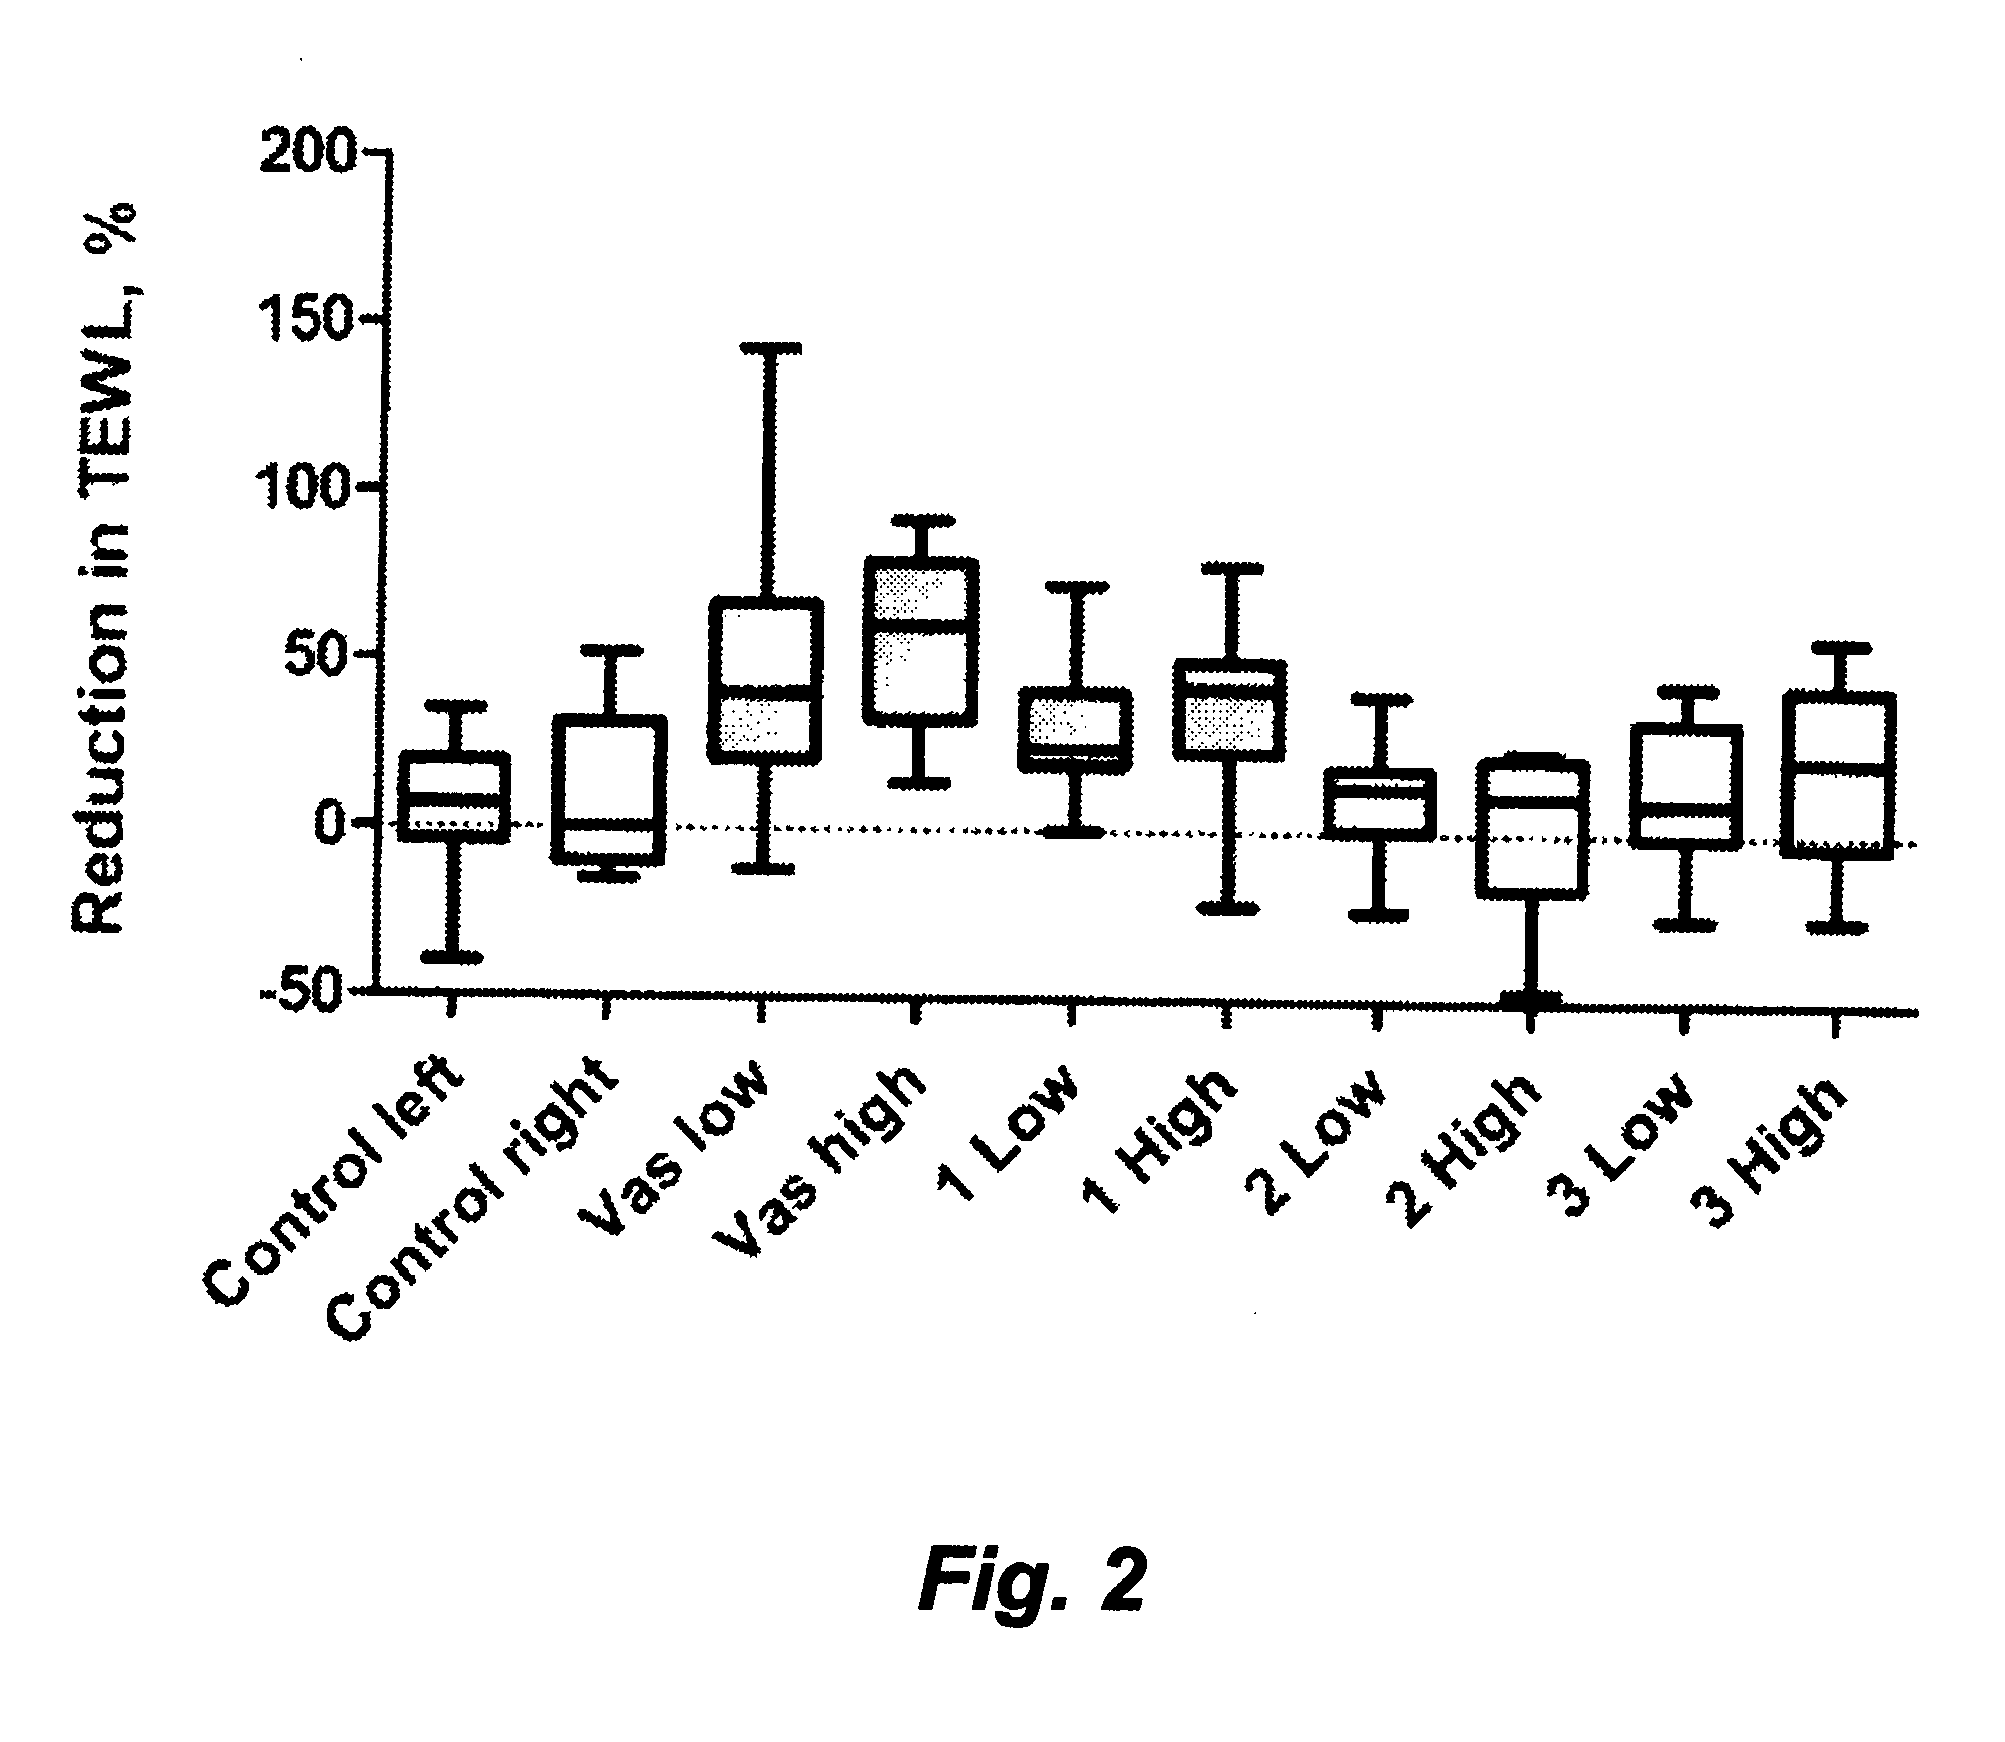 Lipid layer forming composition for administration onto a surface of a living organism